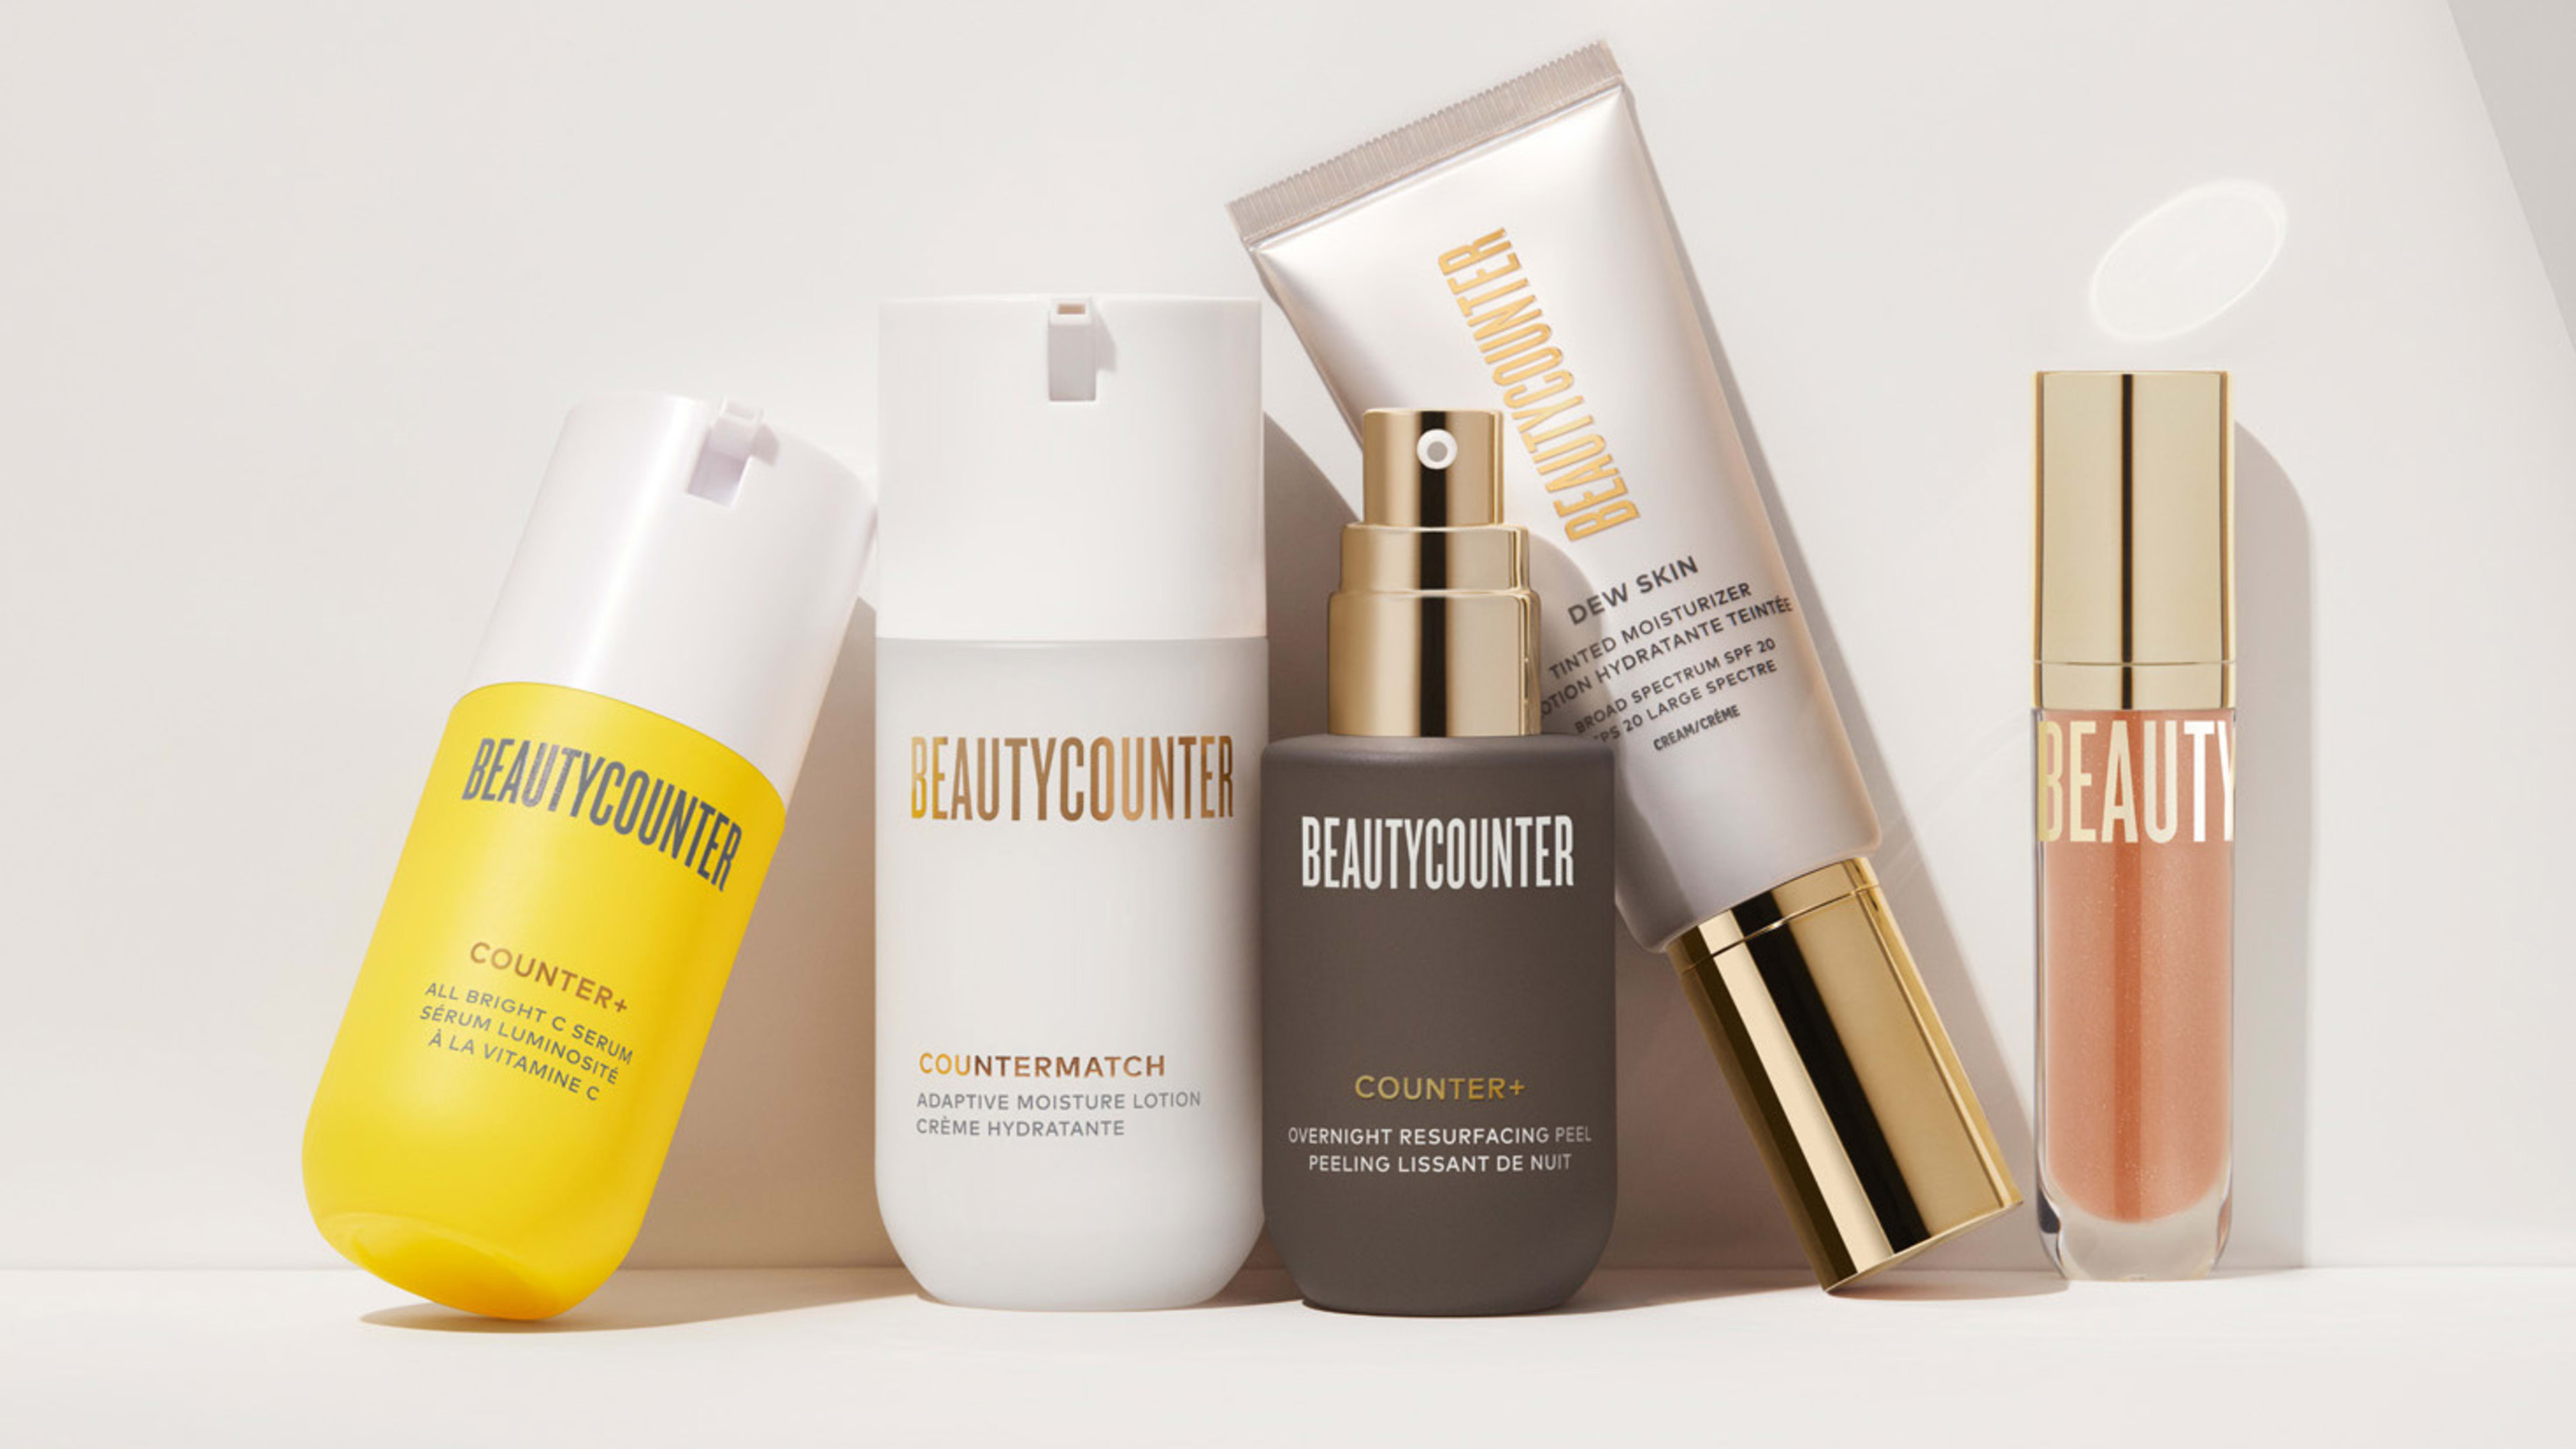 Clean beauty is now a $1 billion business. Just ask Beautycounter